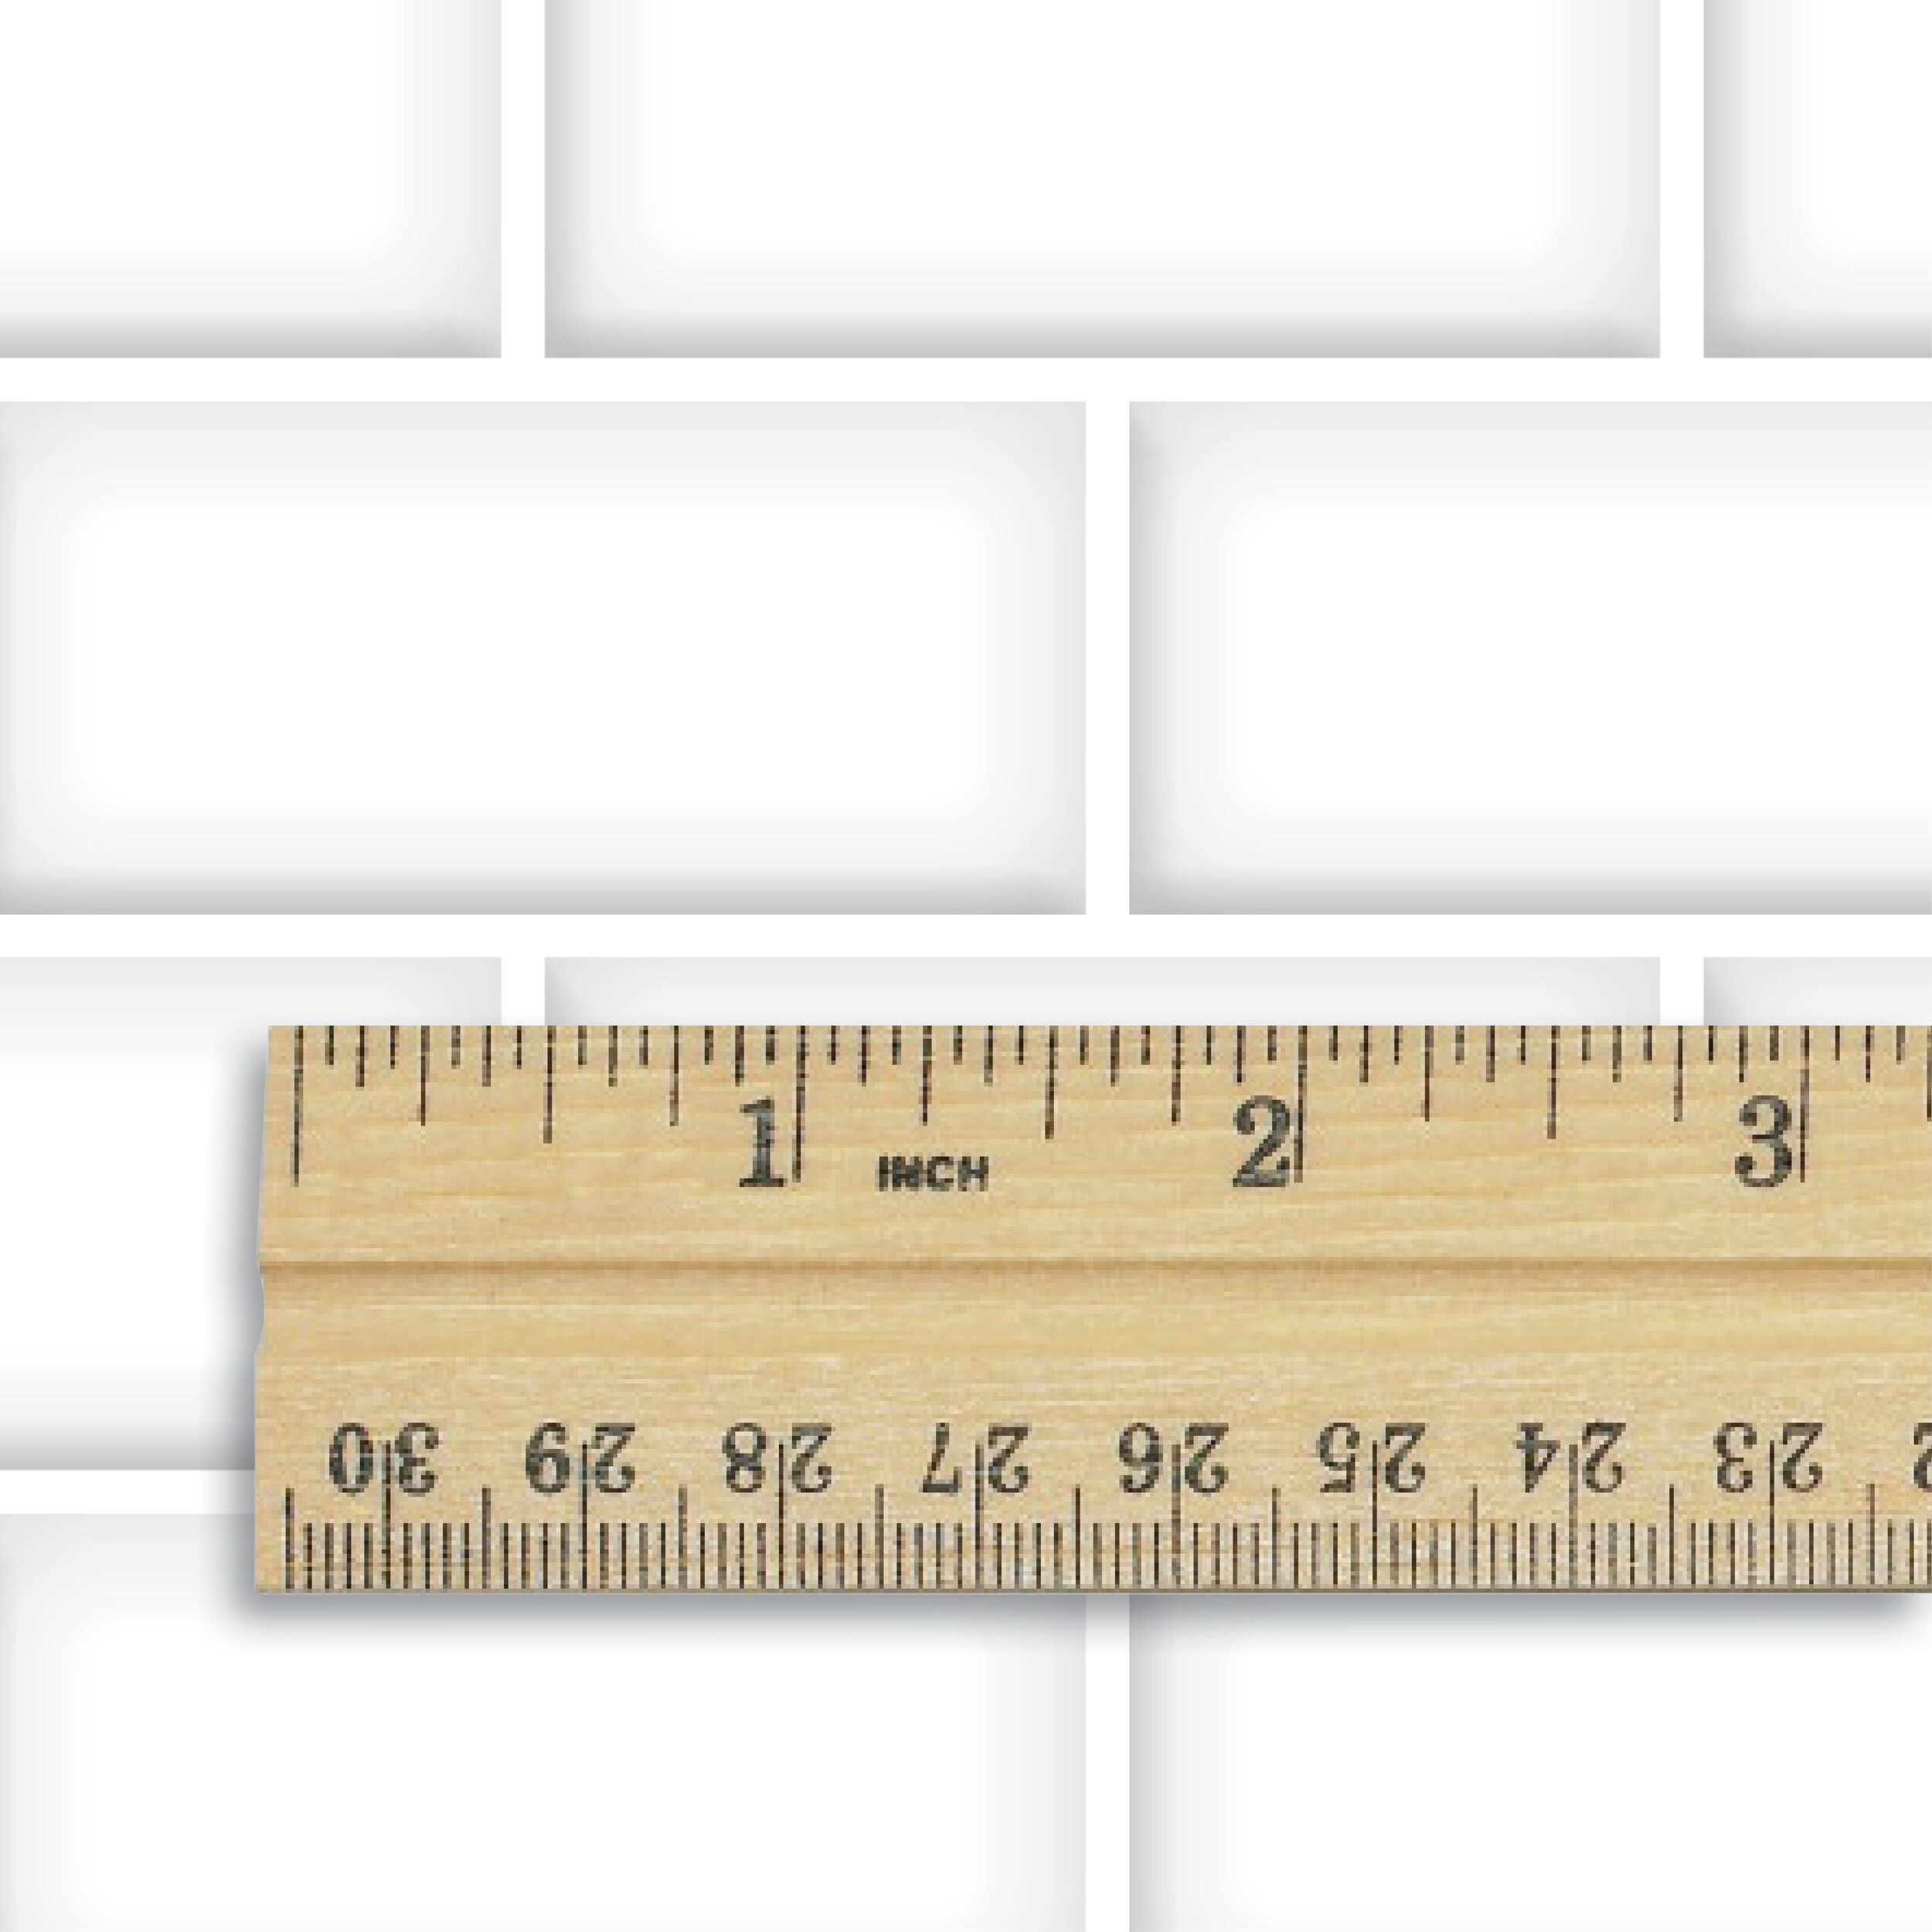 White Subway Tile Grout Printable, How Thick Is 3 215 6 Subway Tiles